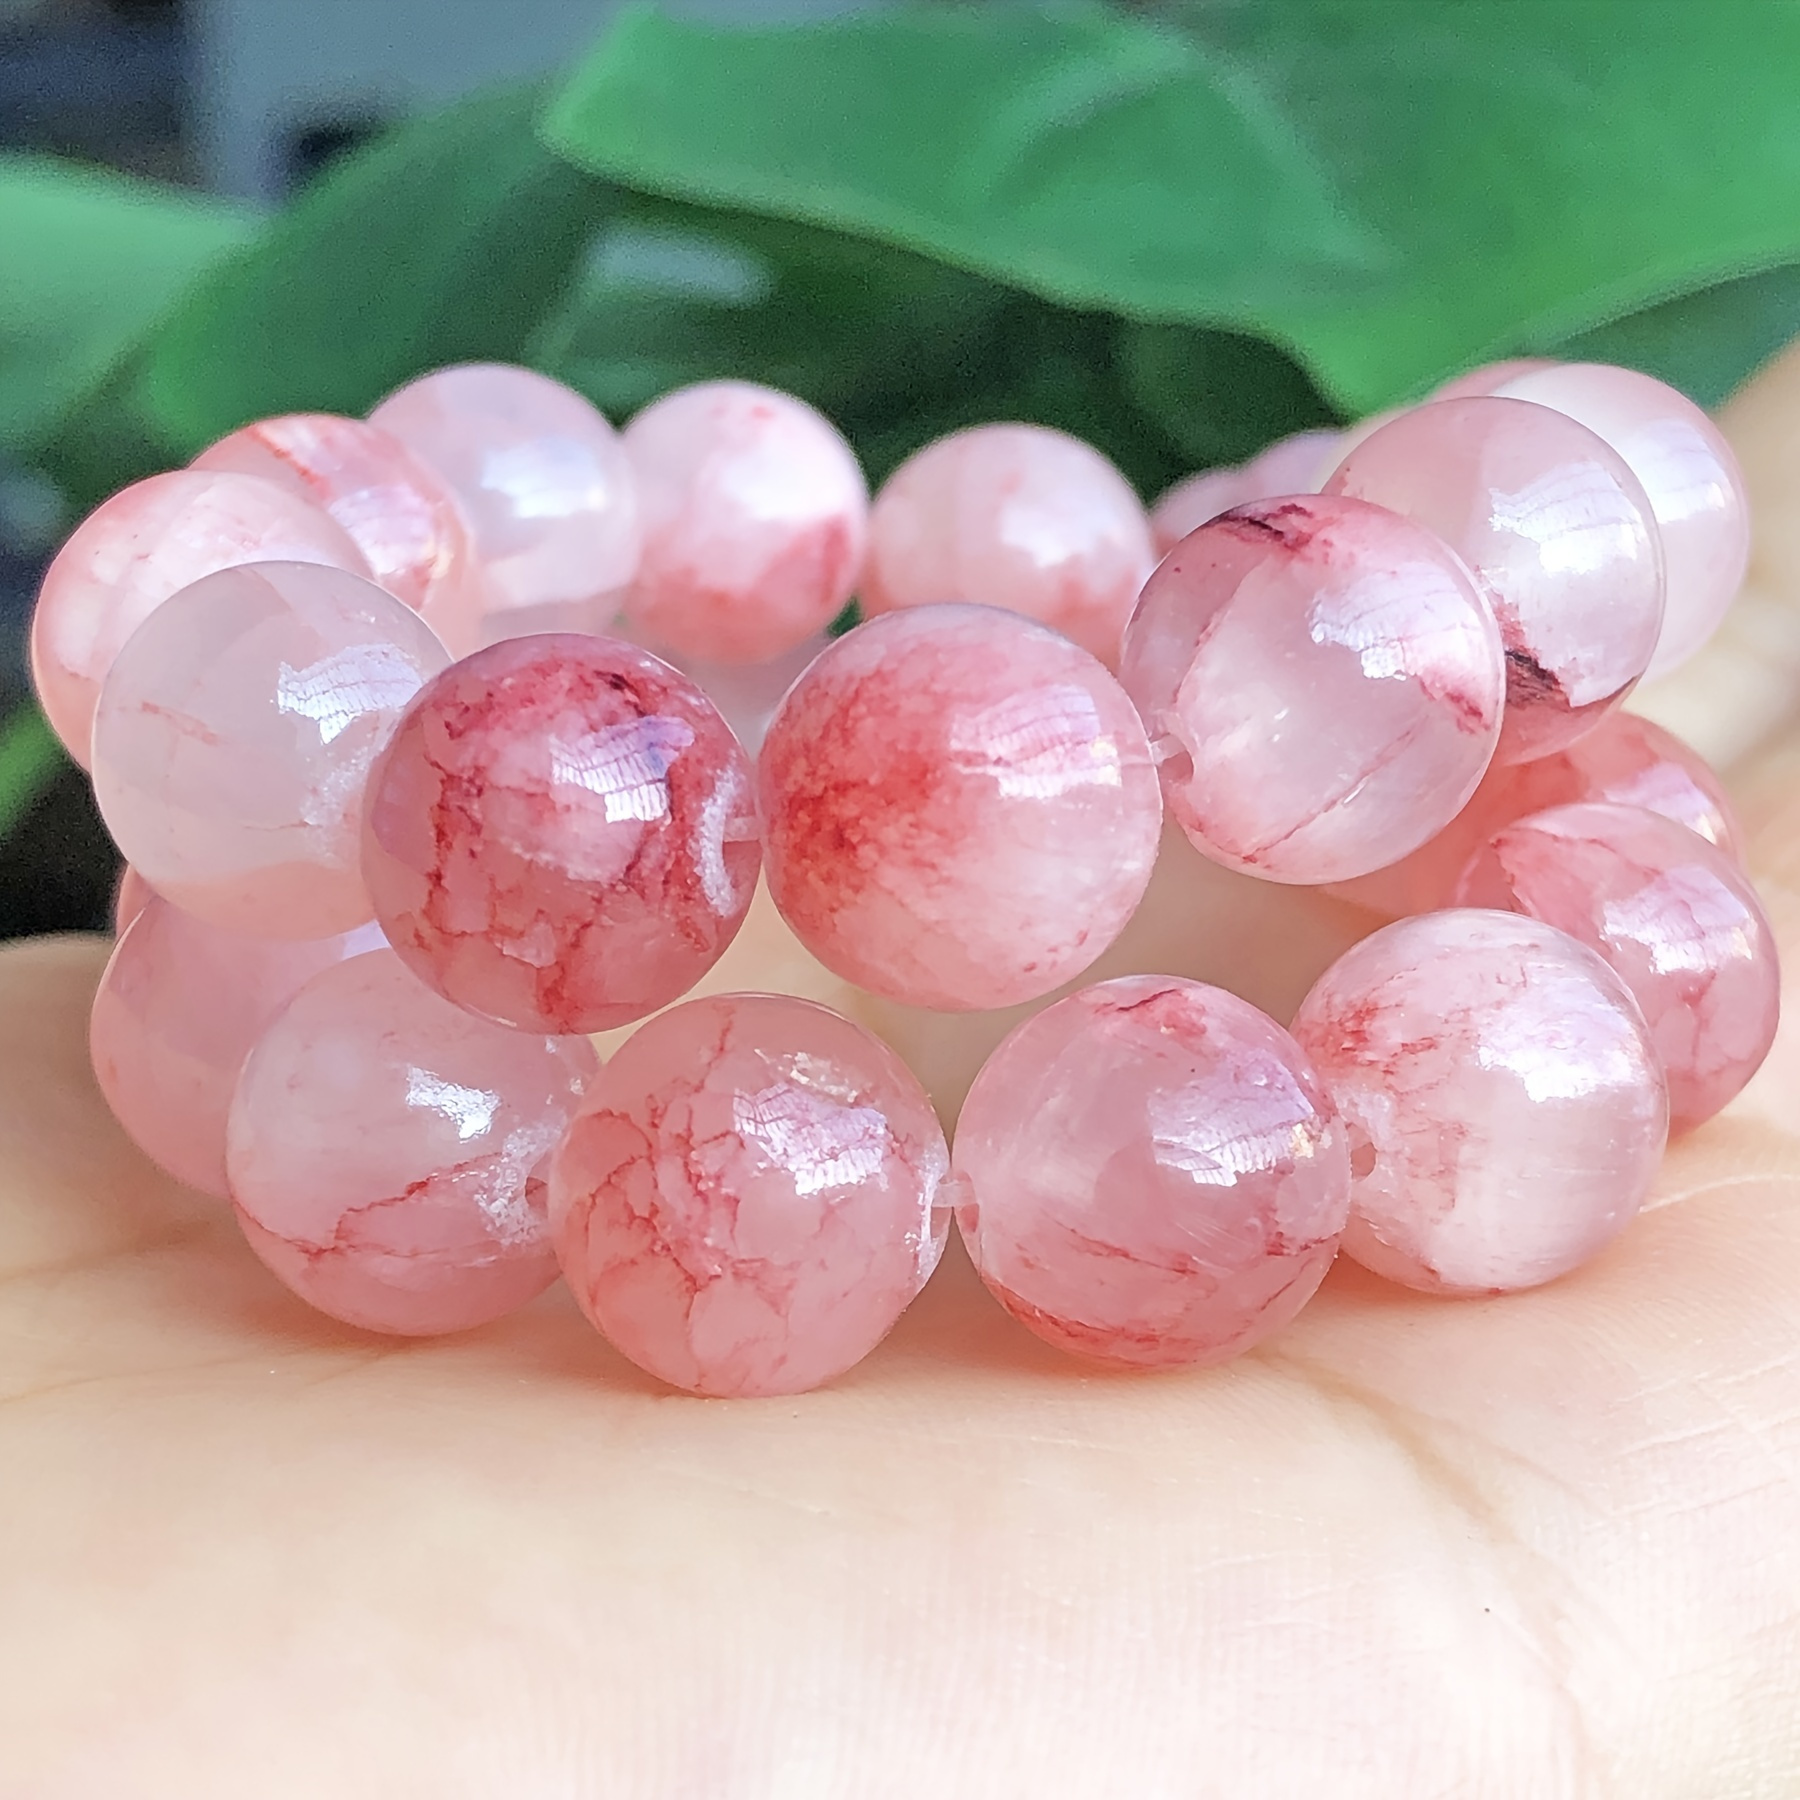 

Natural Stone Cherry Veins Chalcedony Jades Beads Round Loose Spacer Beads For Jewelry Making Diy Bracelet Necklace Beads 4mm (0.157")-10mm (0.393")